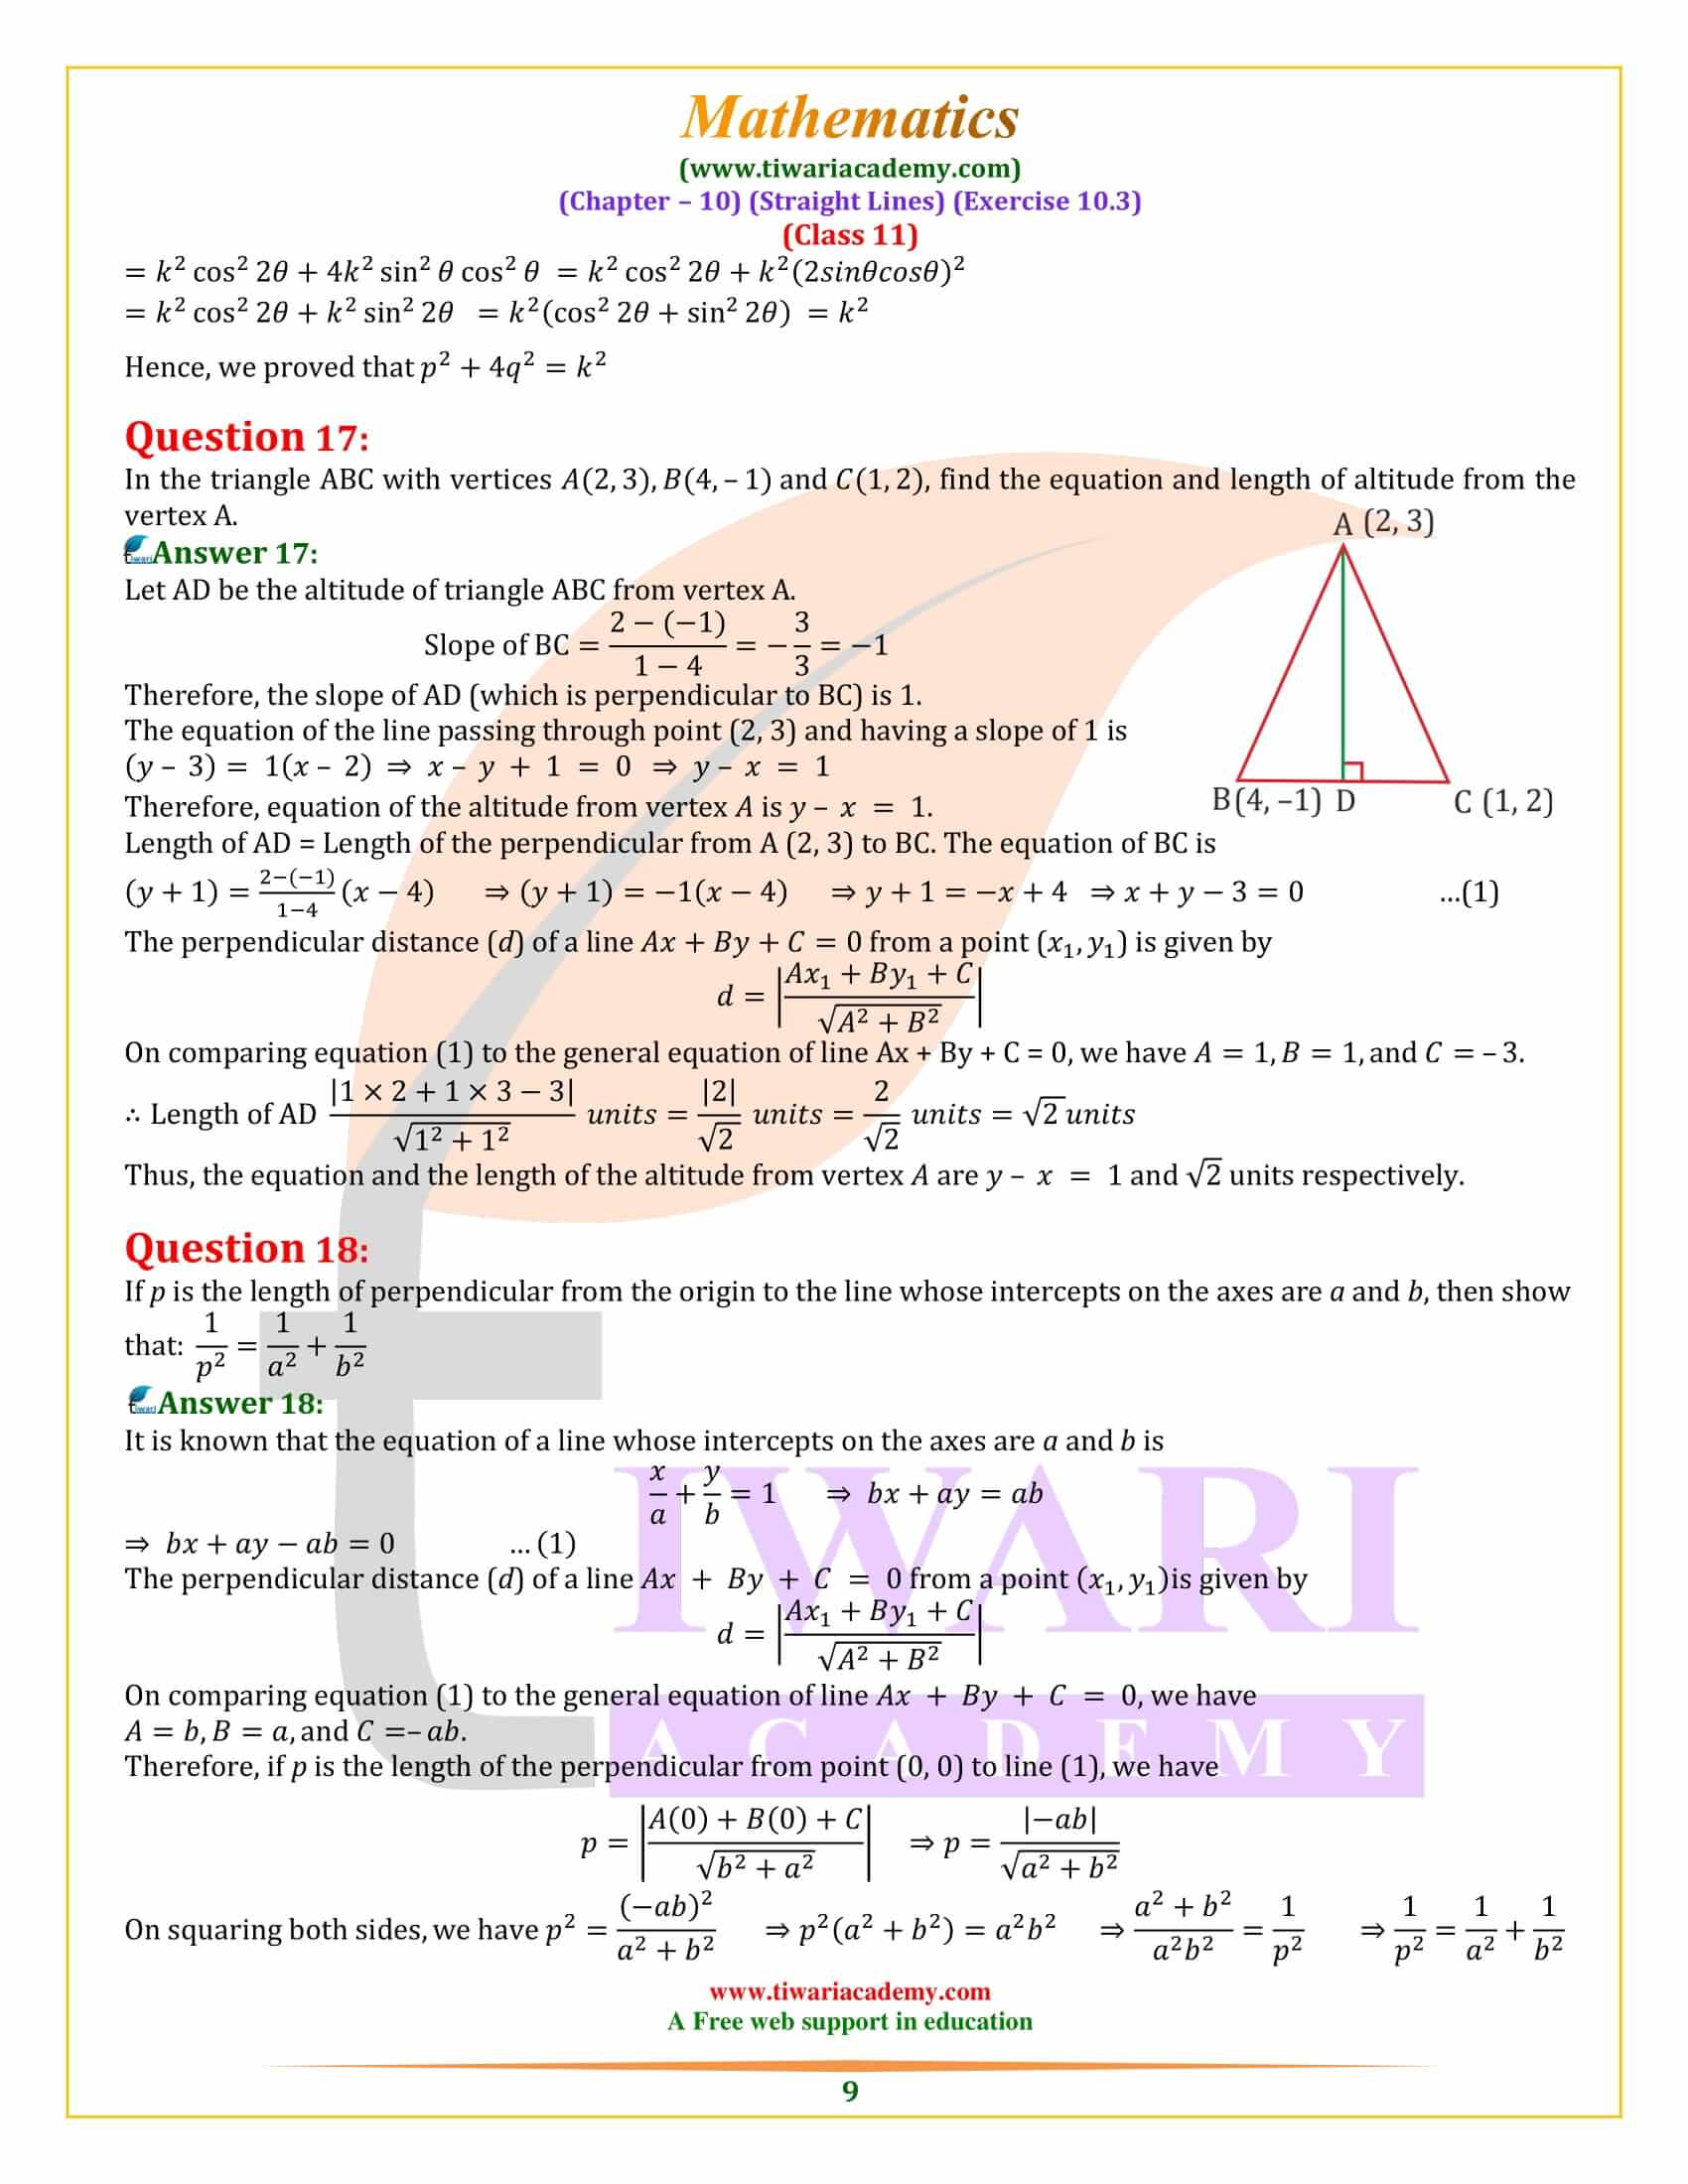 NCERT Solutions for Class 11 Maths Exercise 10.3 free guide